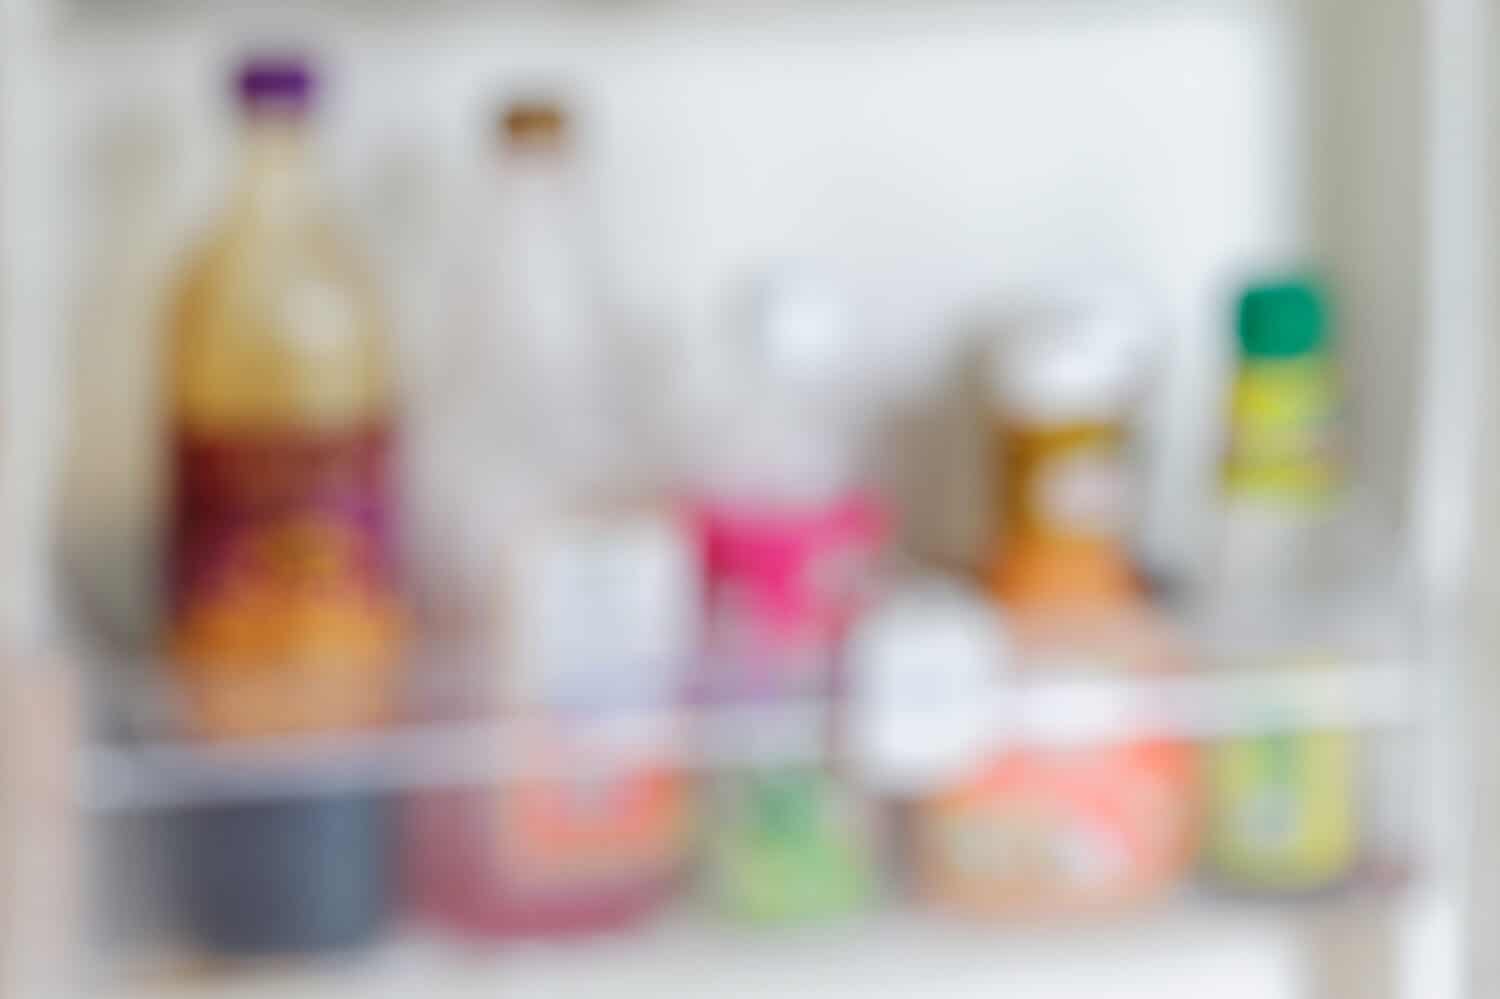 Blurred picture of ketchup, salad dressings, mayonnaise and sauces bottles arranged side by side inside a refrigerator.